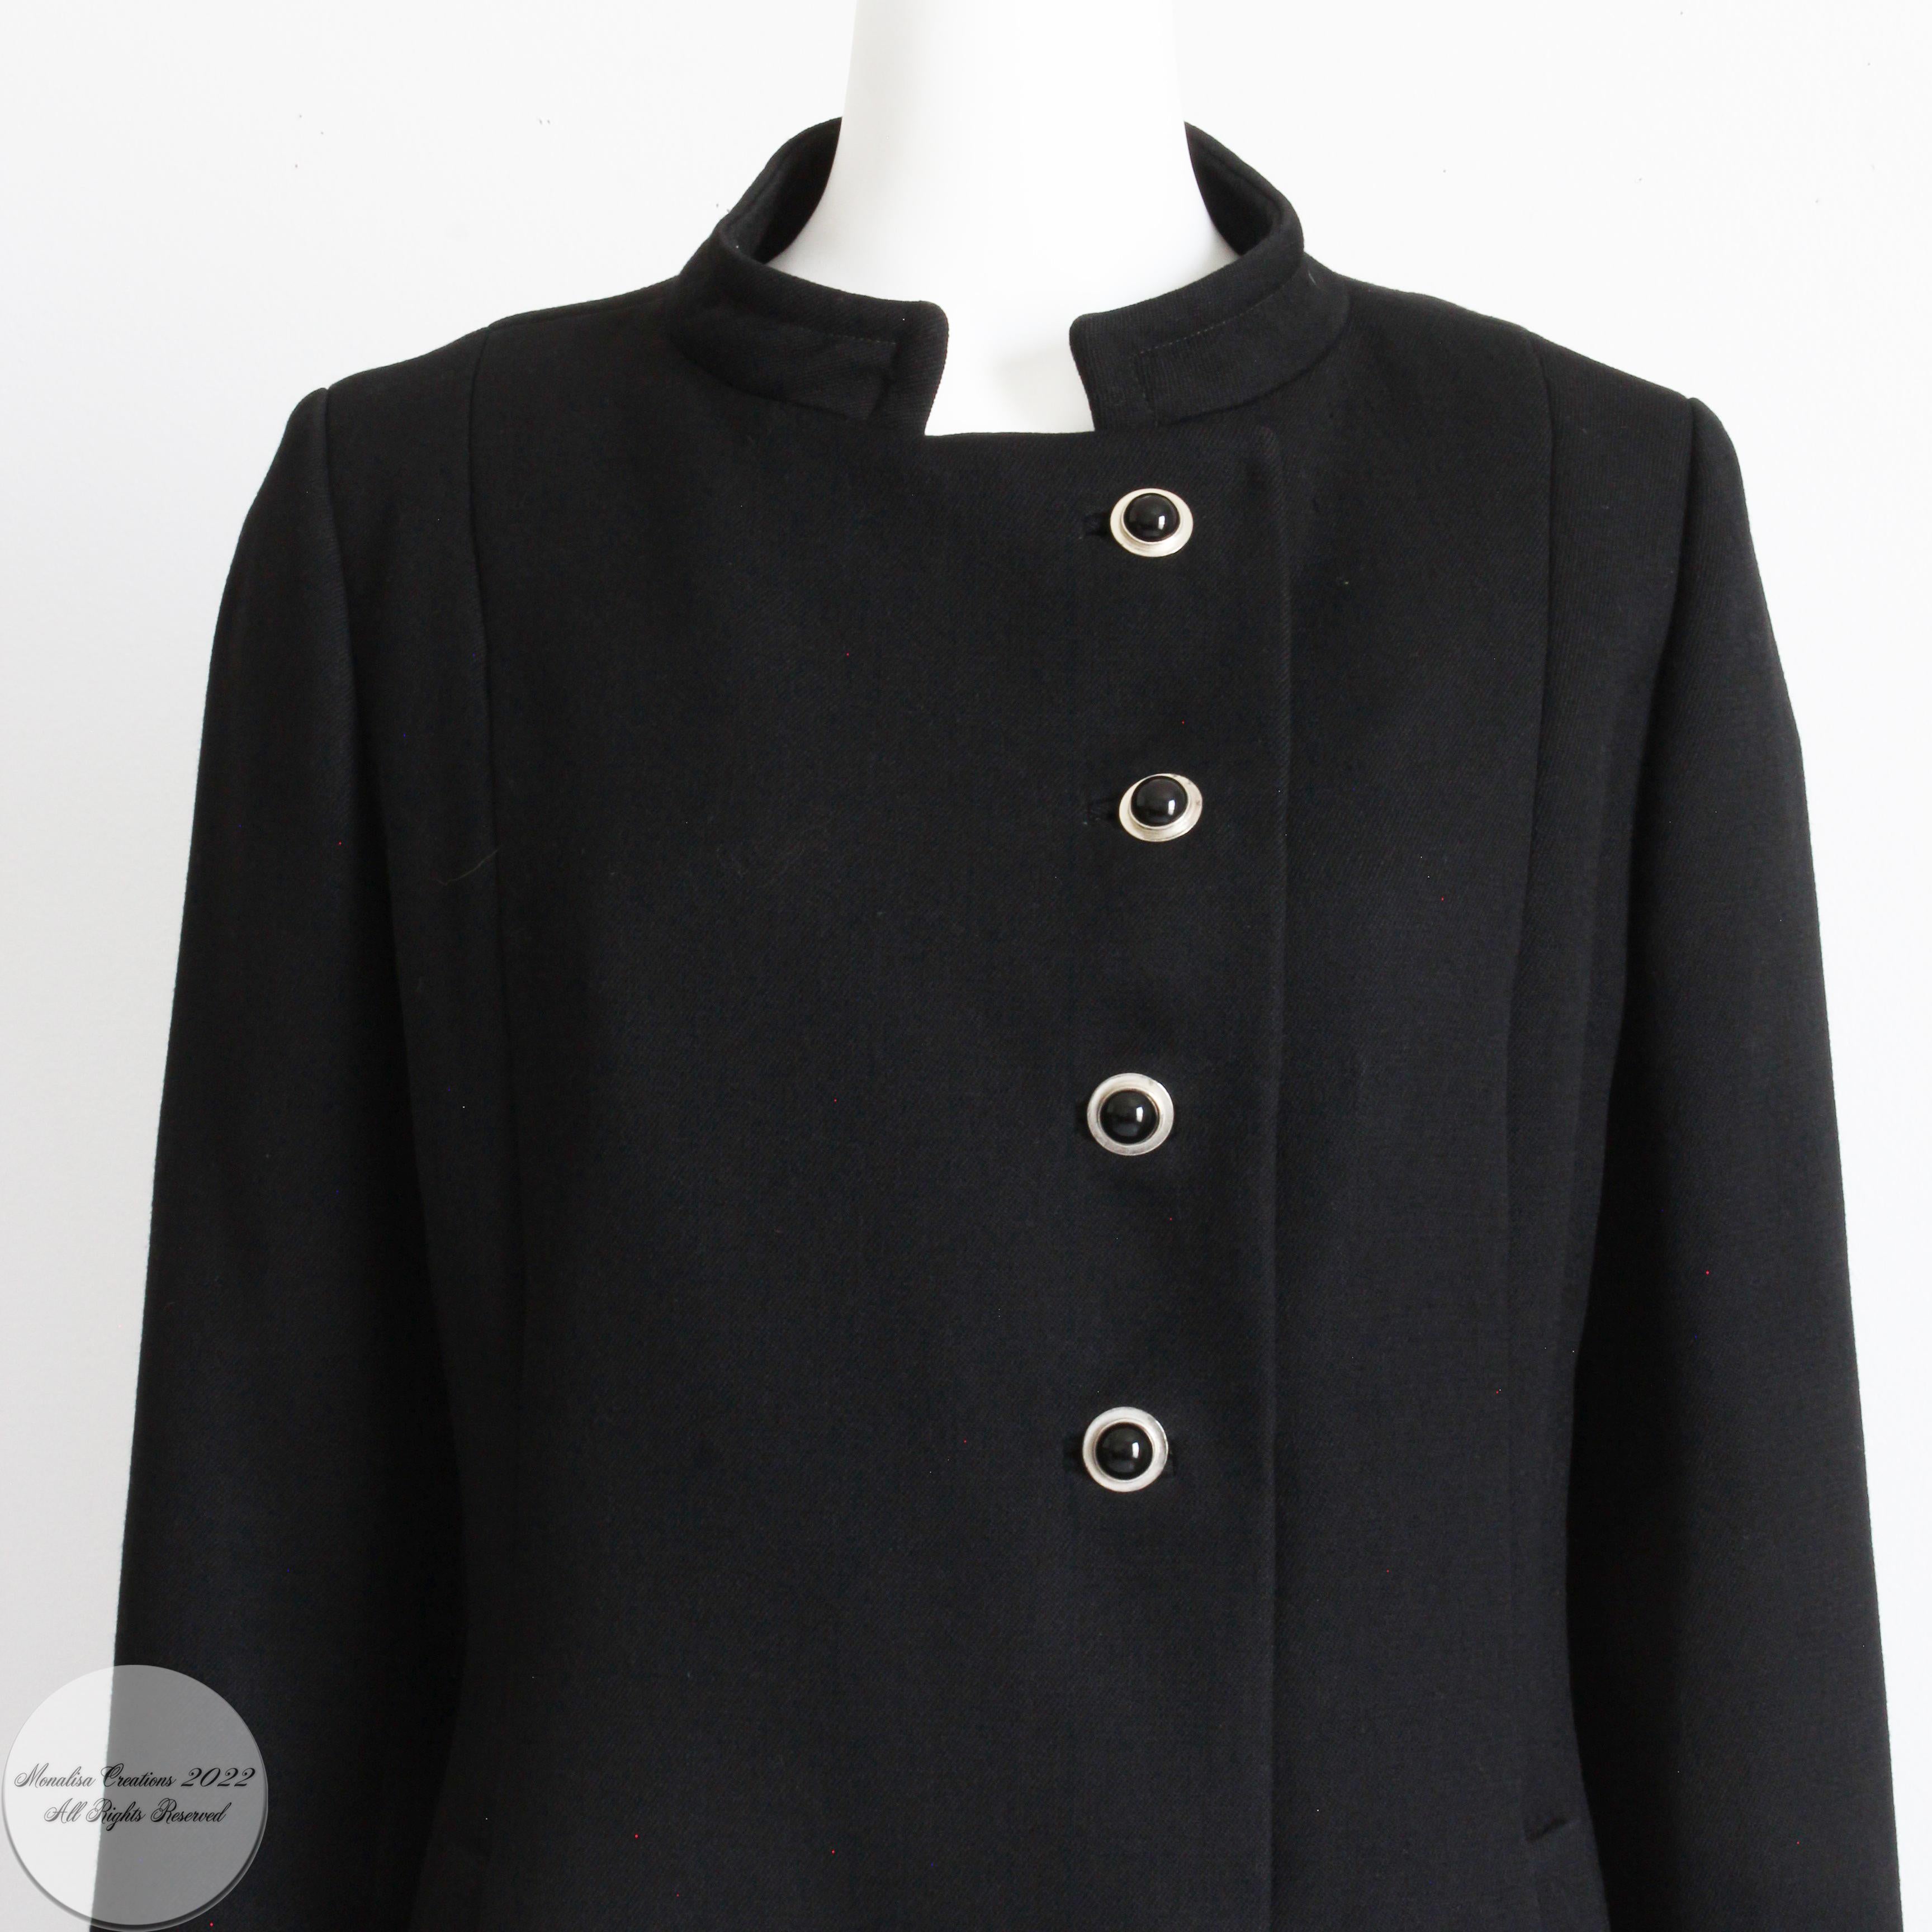 Vintage military style virgin wool coat, made by Zelinka Matlick and sold by high end apparel store Martins of Brooklyn, most likely in the mid 50s. Made from black virgin wool, the tailoring is downright amazing on this coat! It fastens with black